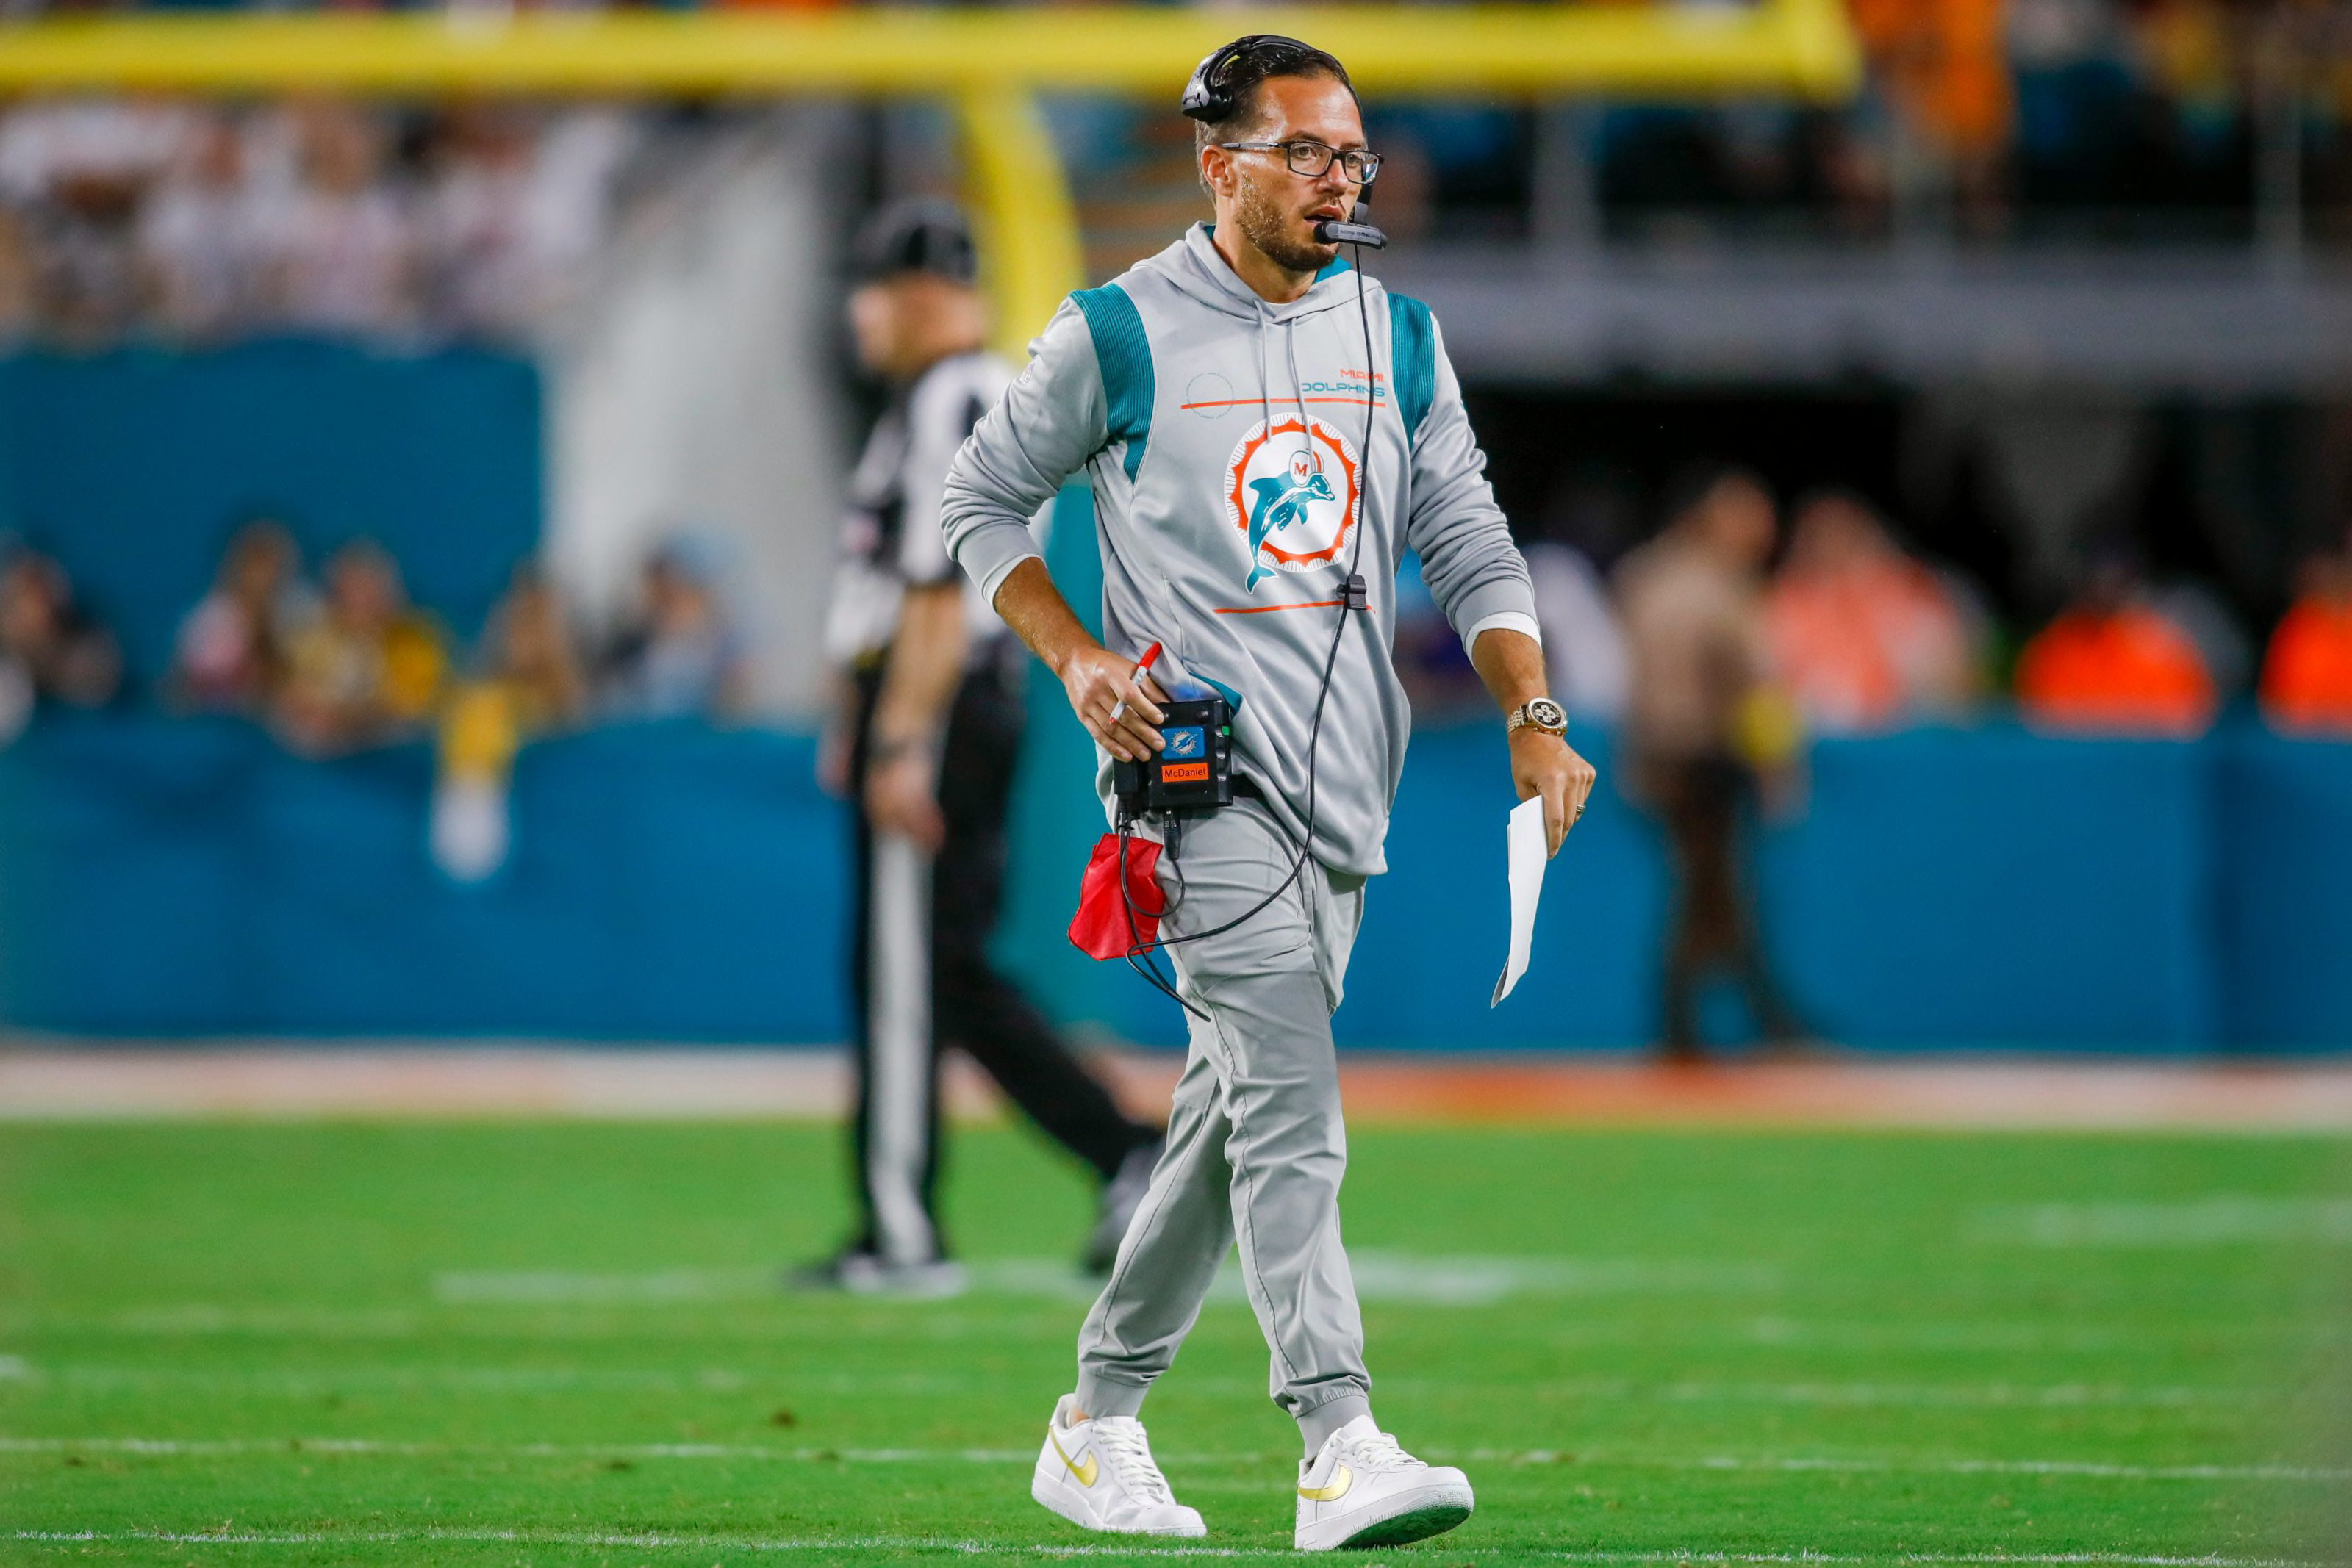 Miami Dolphins Stock Up/Stock Down after Week 7 win over Steelers Page 4